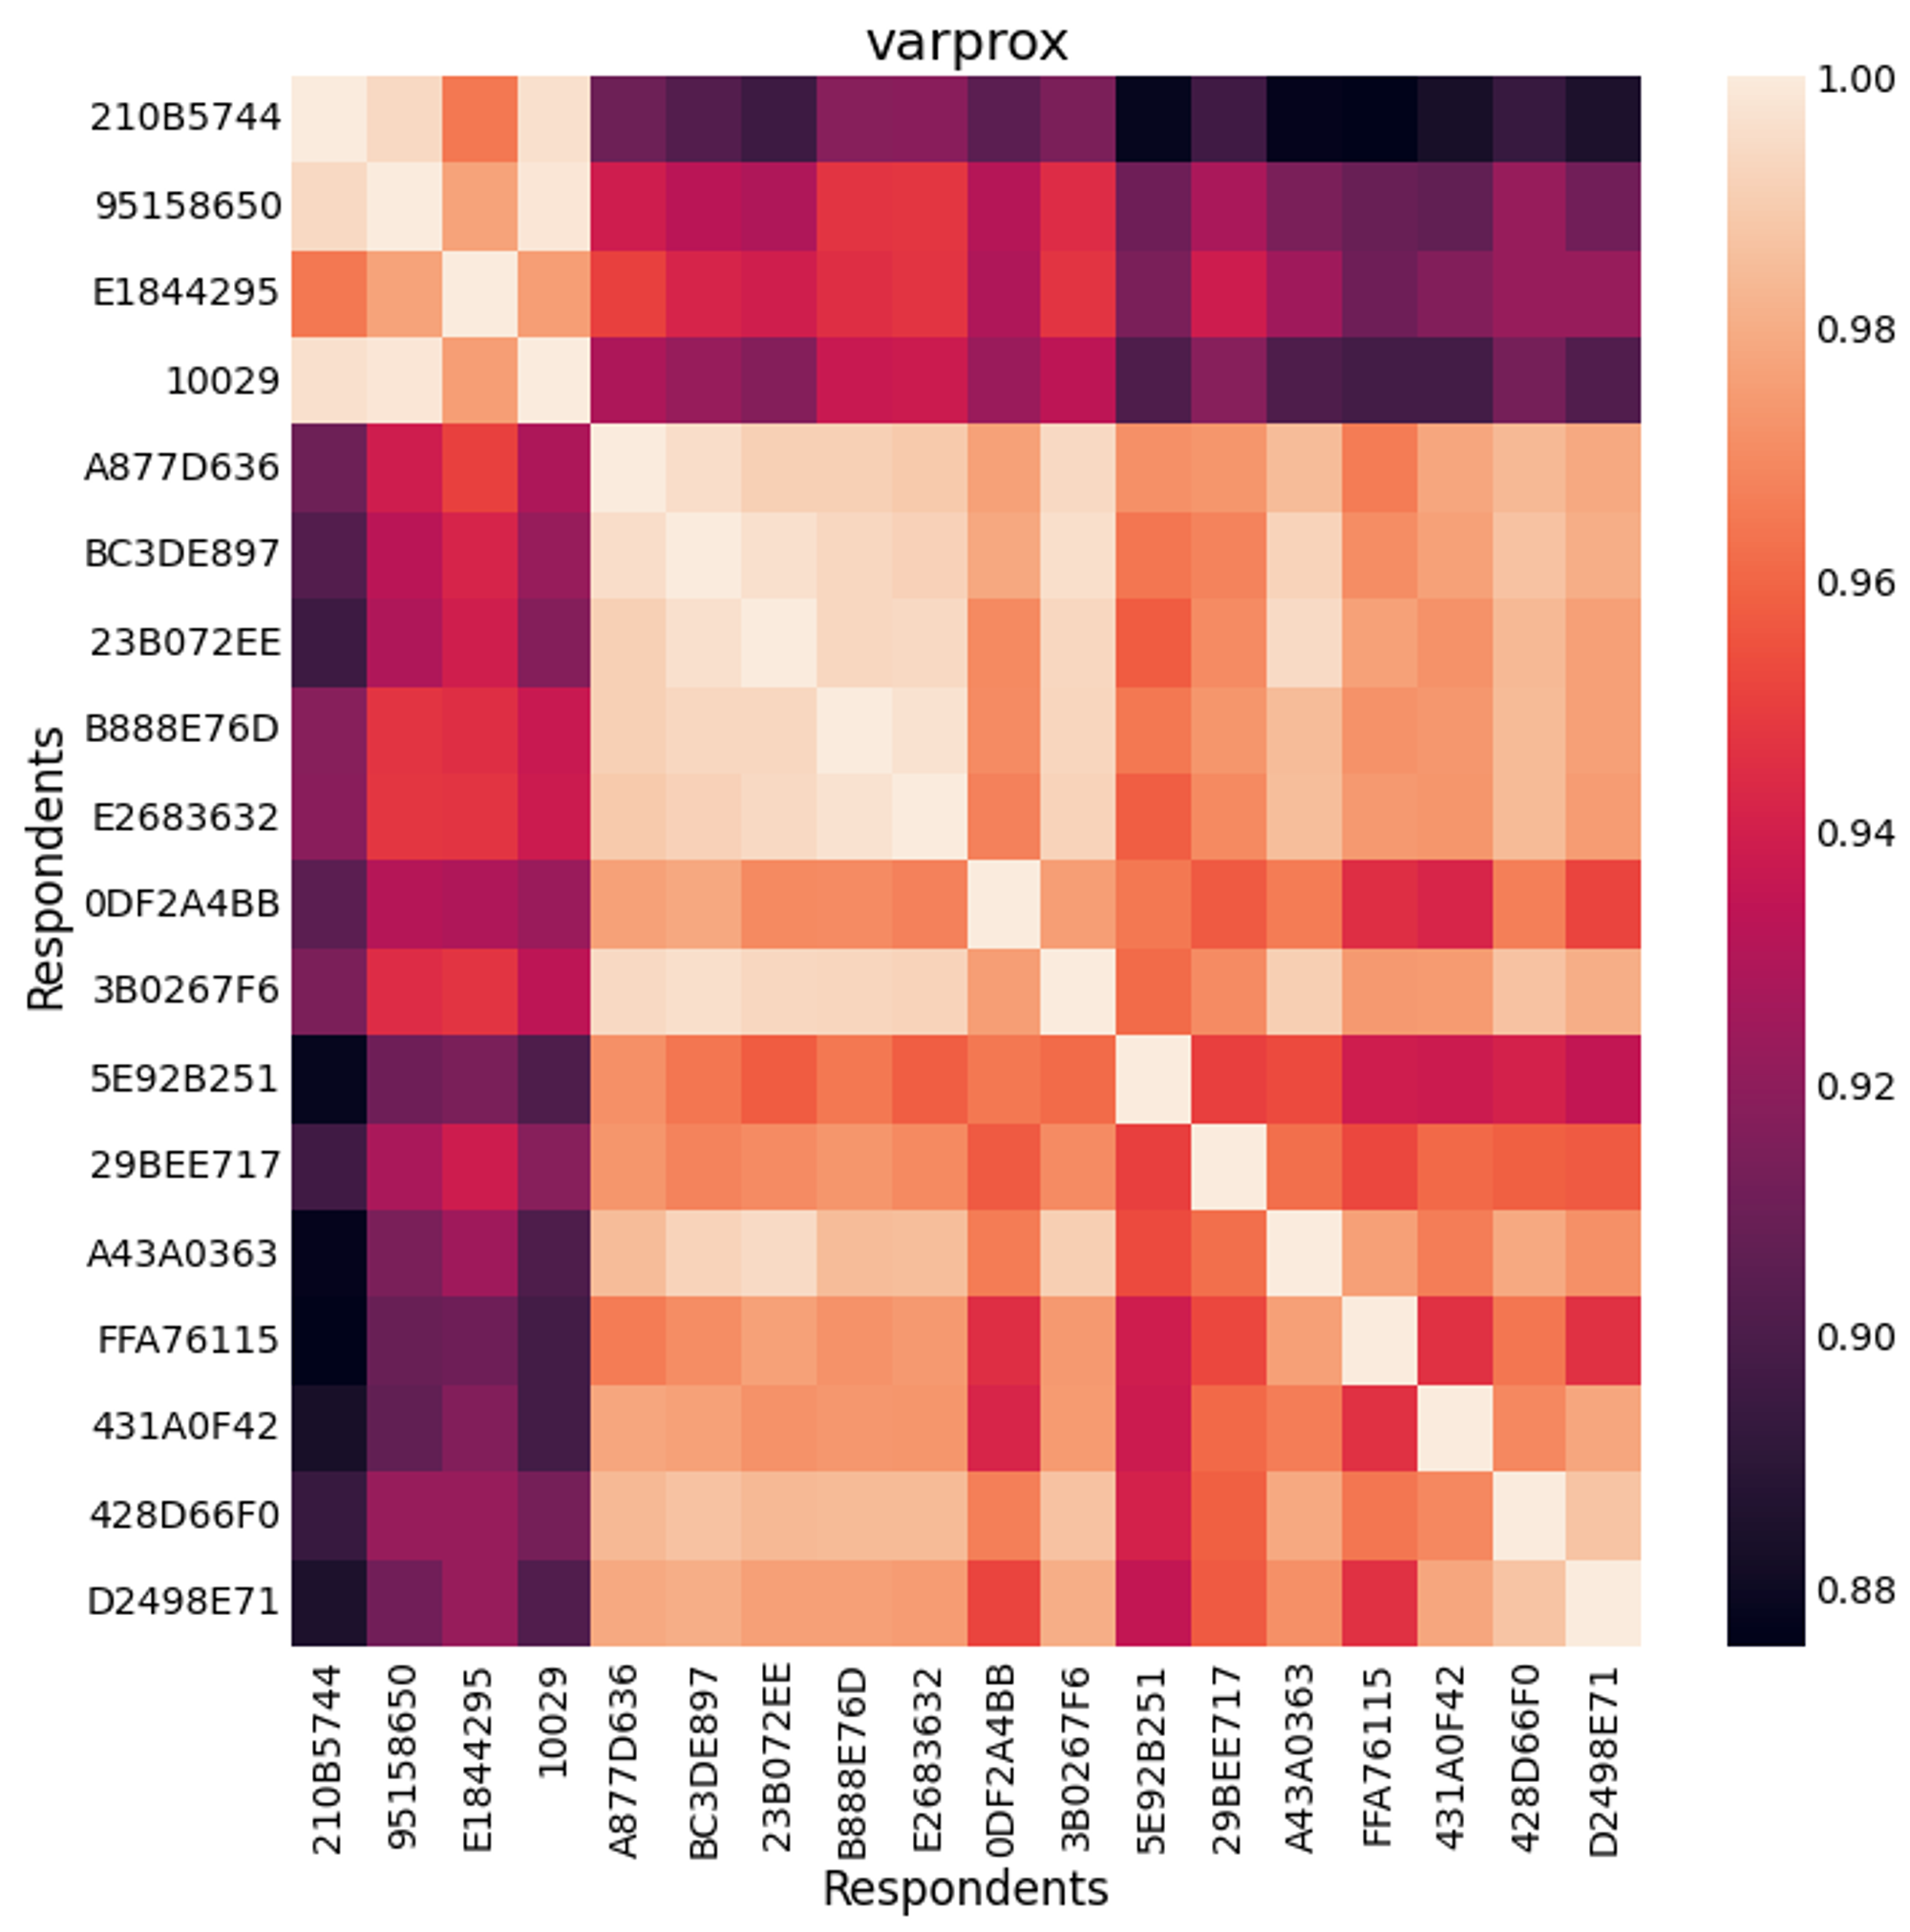 Figure 3. A heatmap visualization of the matrix of pairwise varprox distances. Brighter colors indicate a pair of sensors that are deemed closer by the metric. The matrix elements have been ordered to indicate two distinct respondent groupings.